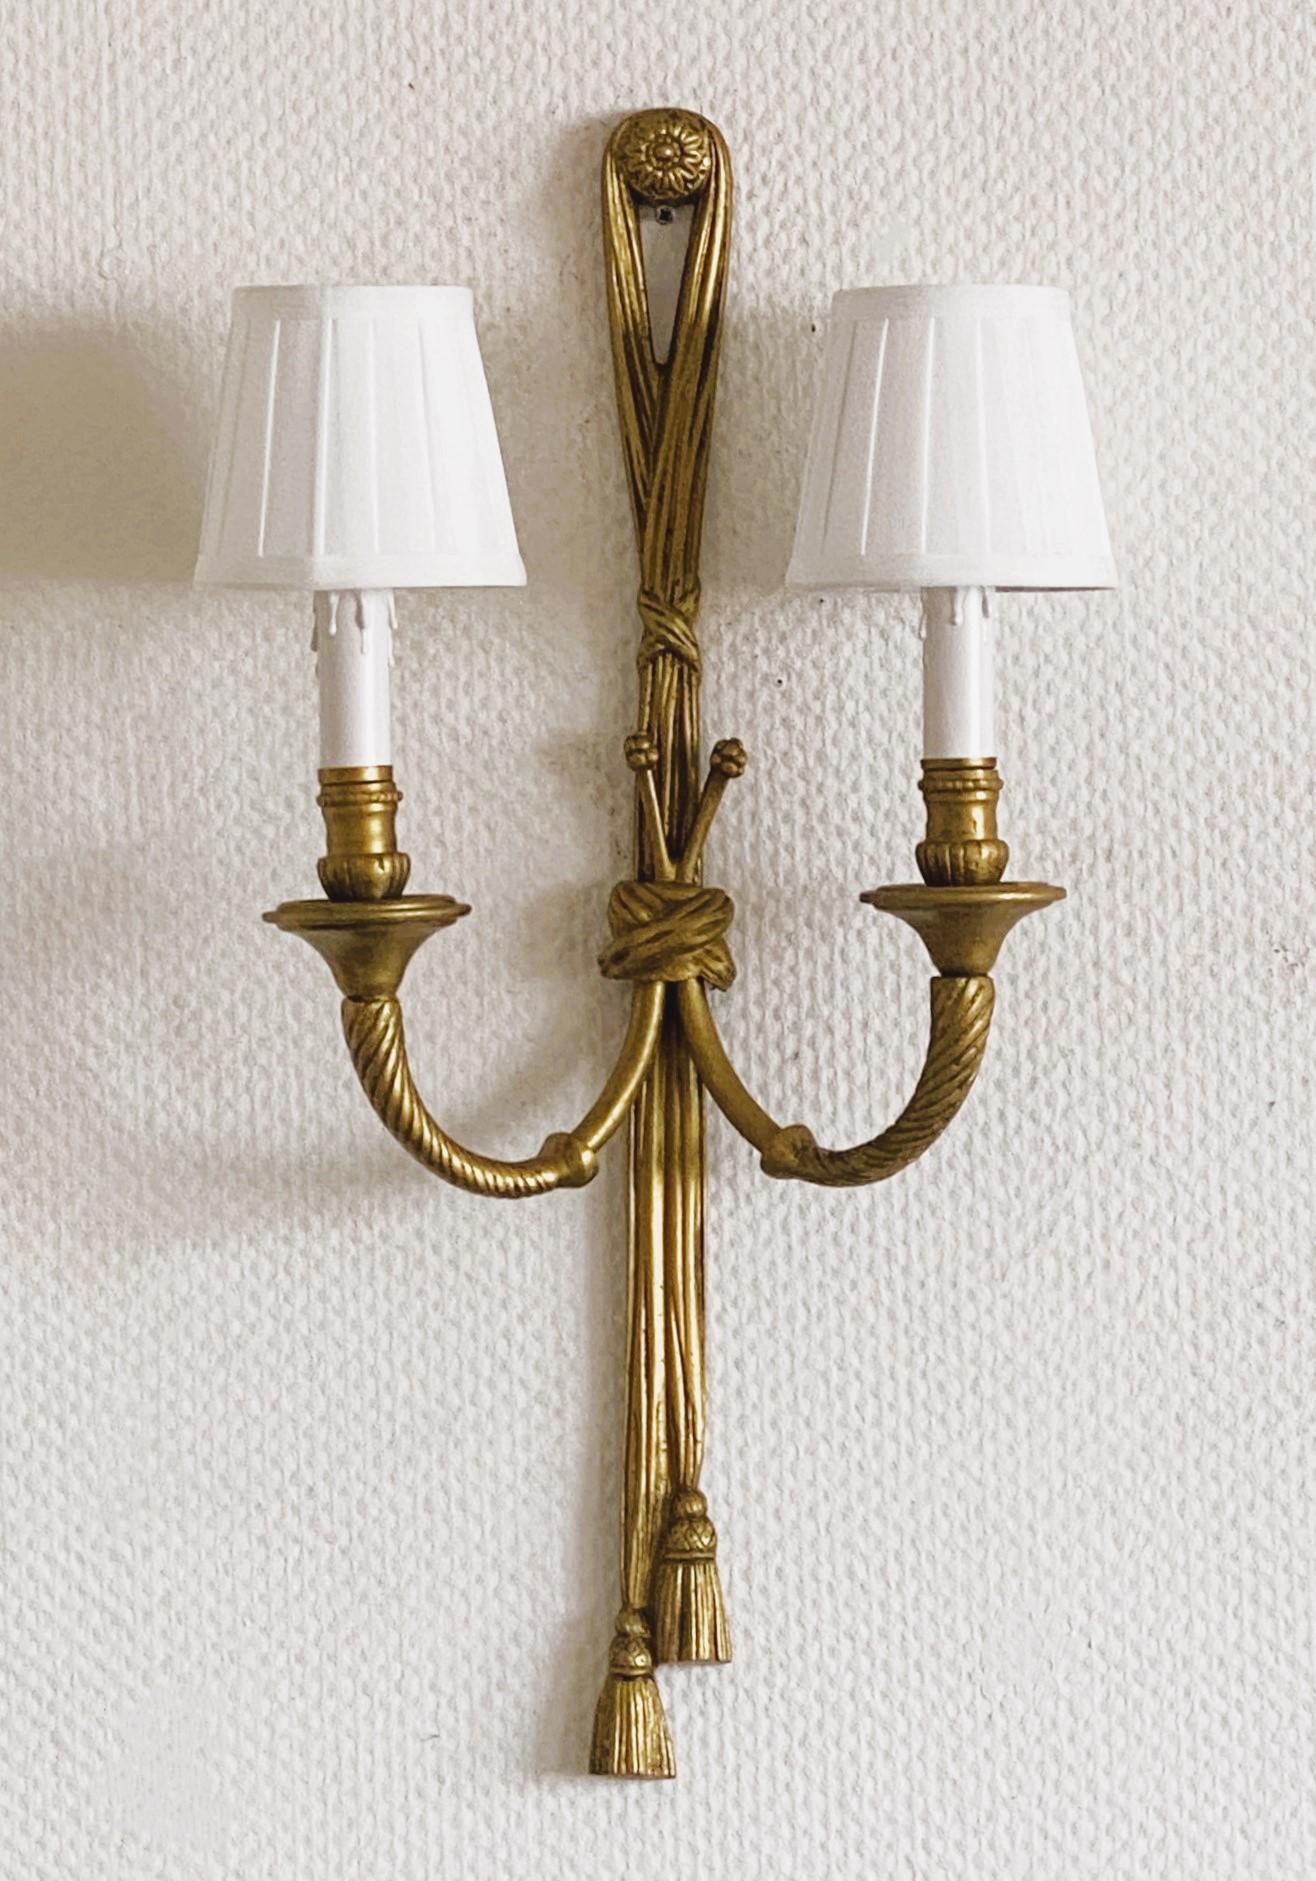 Pair of Tall French Louis XVI Gilt Bronze Electrified Wall Sconces For Sale 1